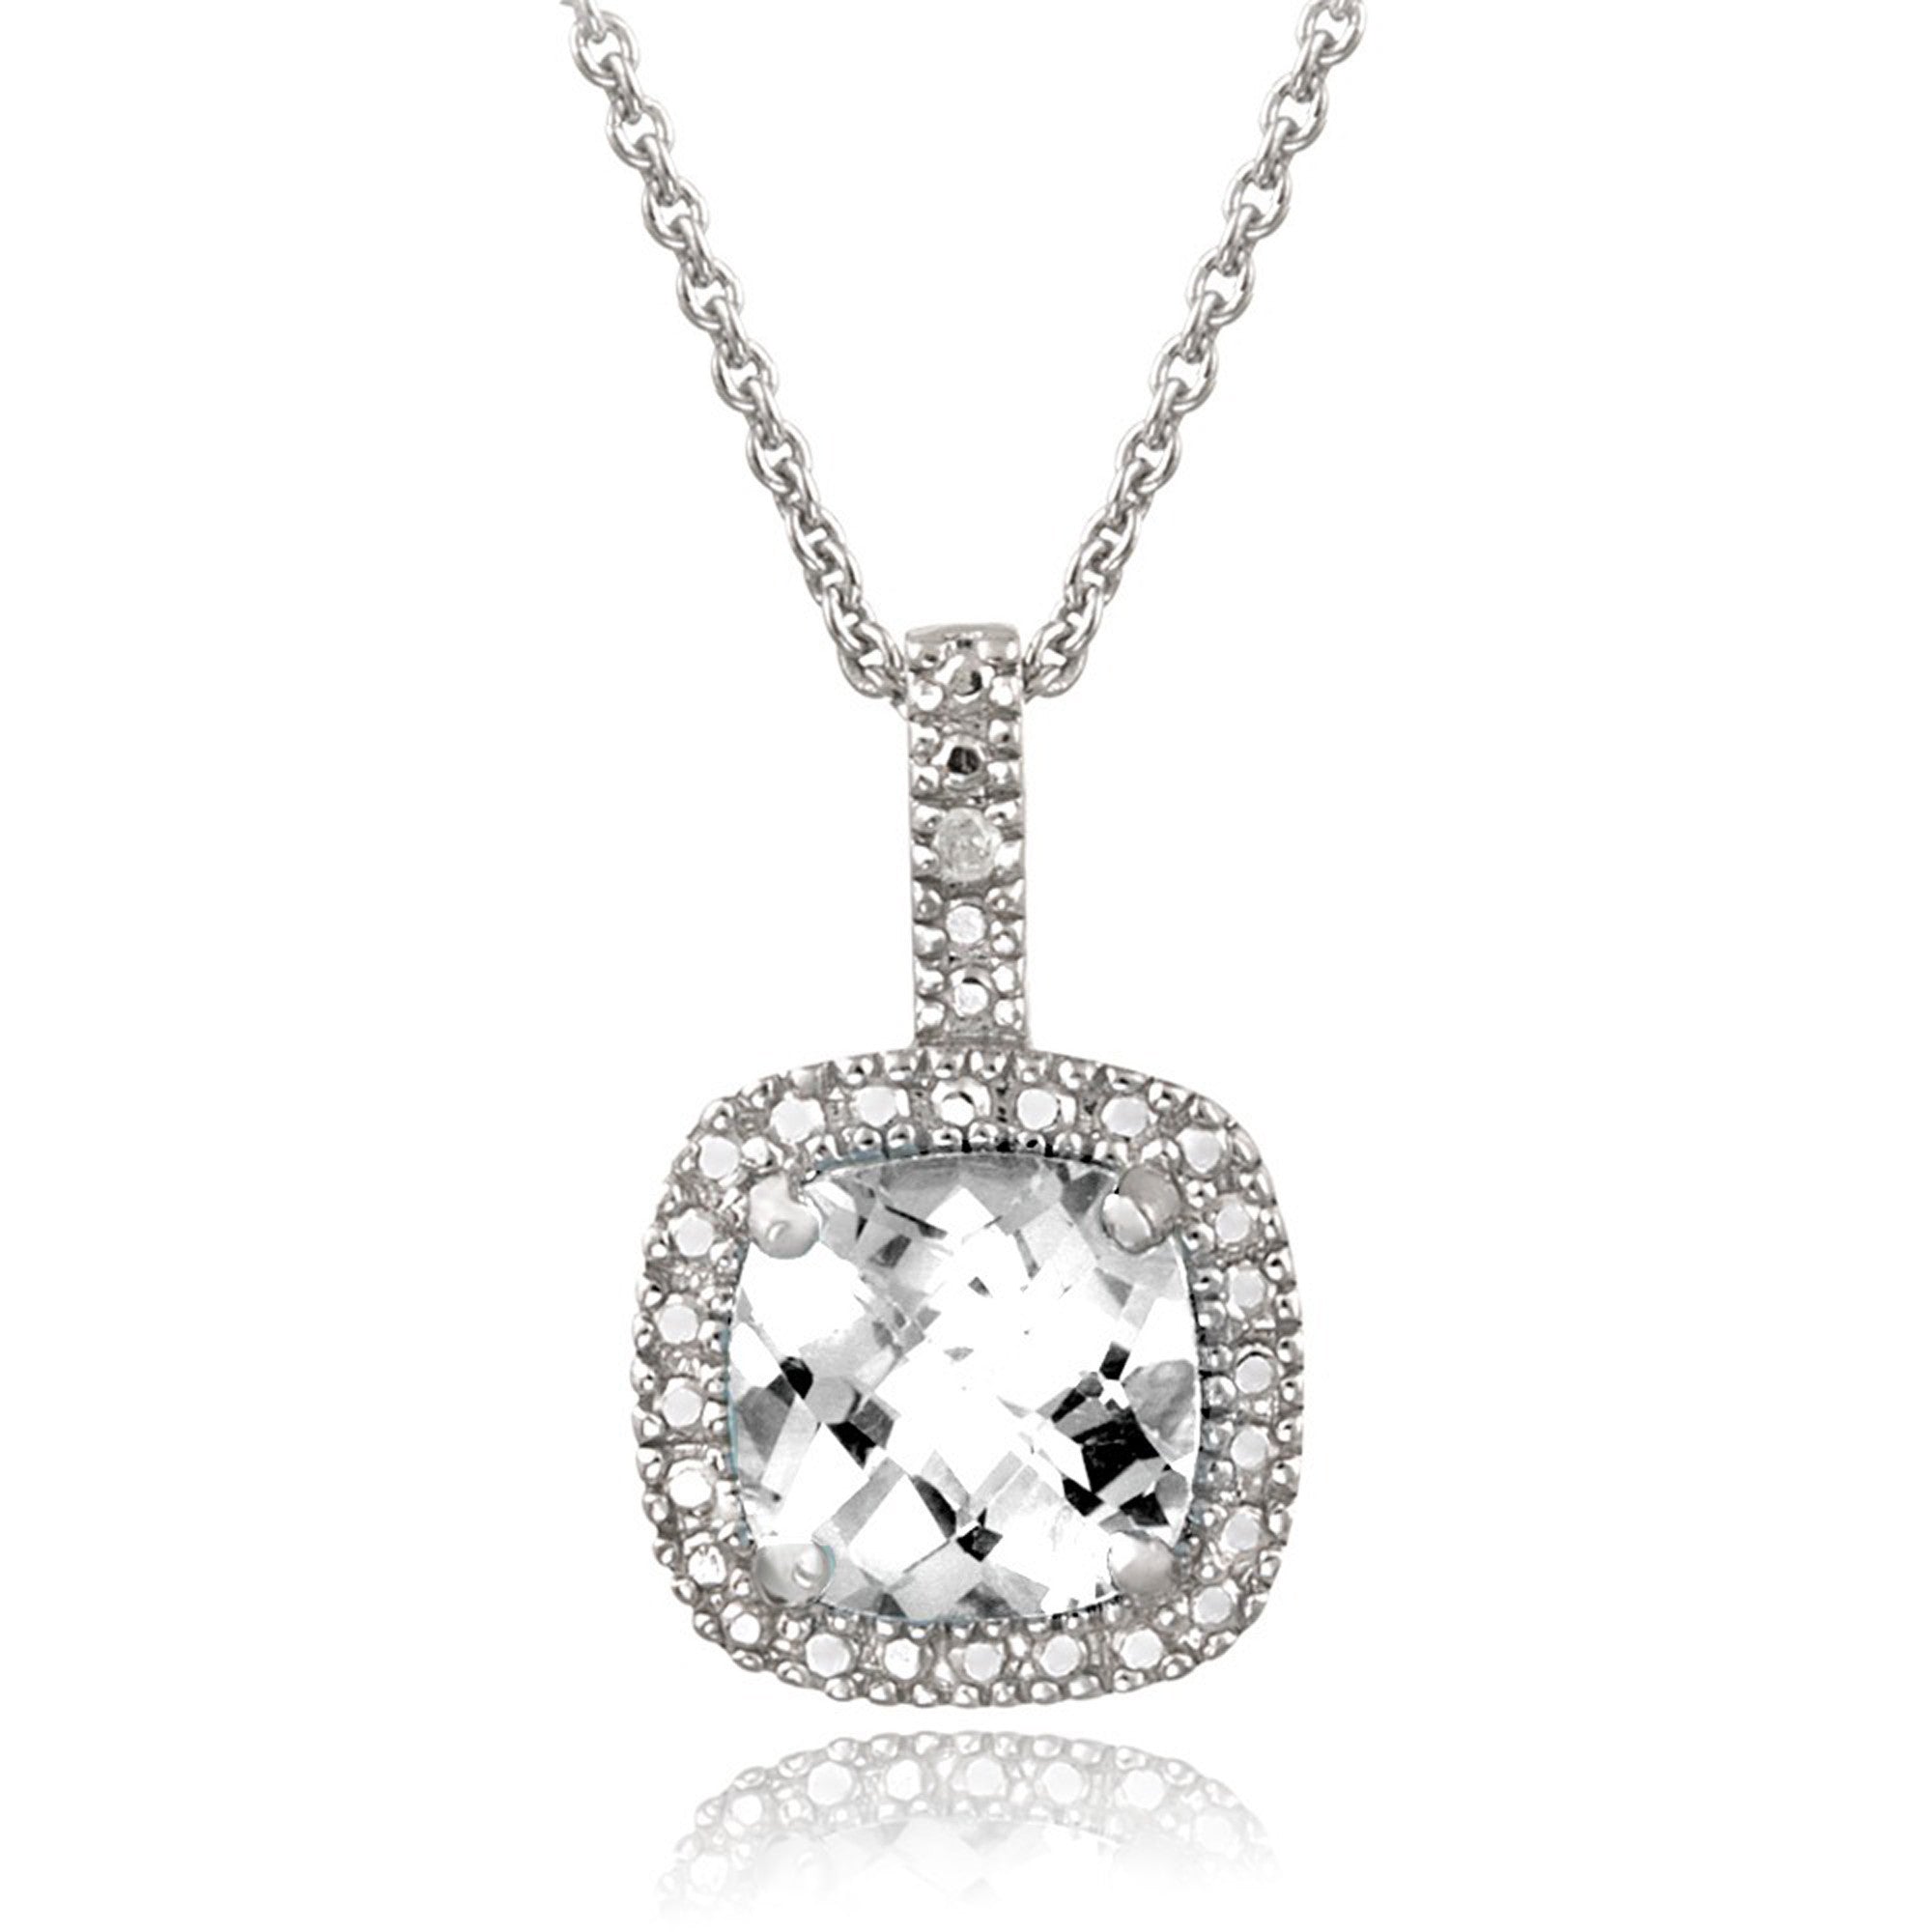 Square Necklace With Gemstone & Diamond Accents in Sterling Silver - White Topaz